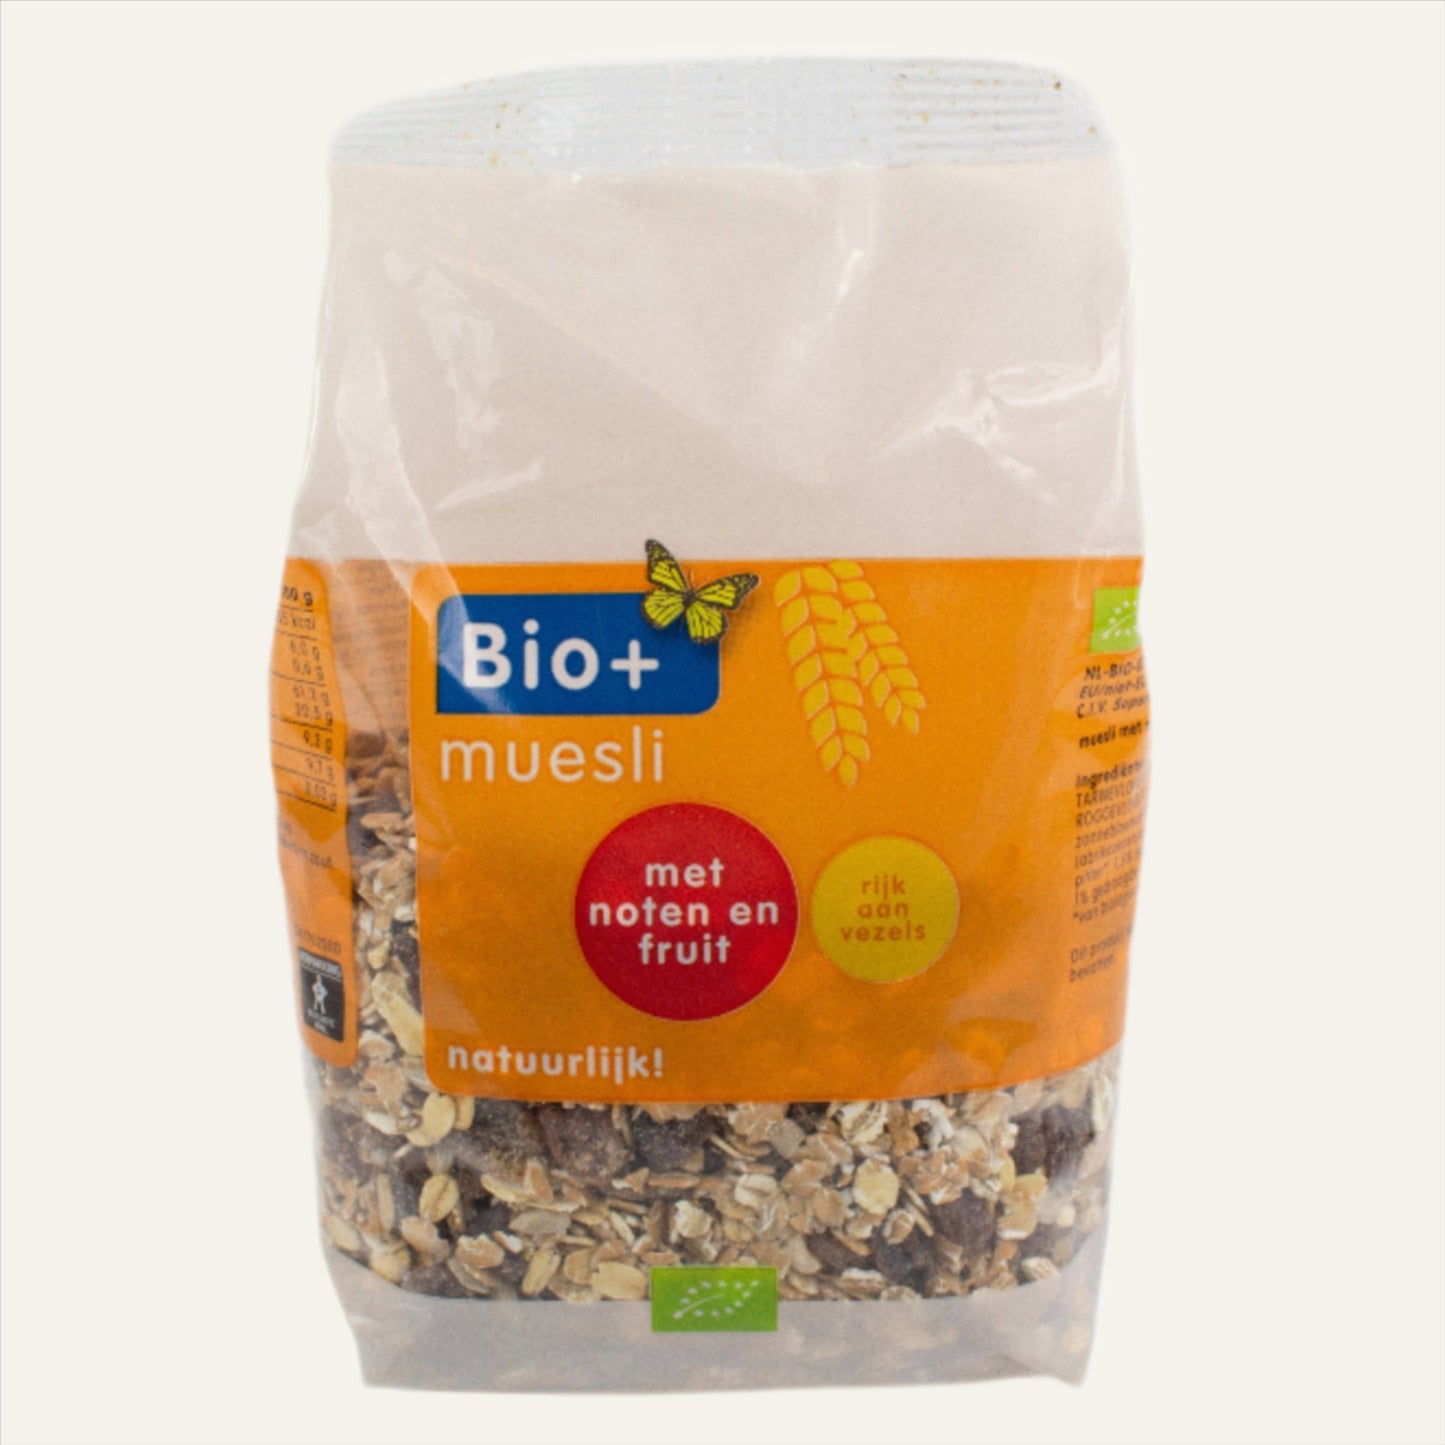 Bio+ Muesli with nuts and fruit